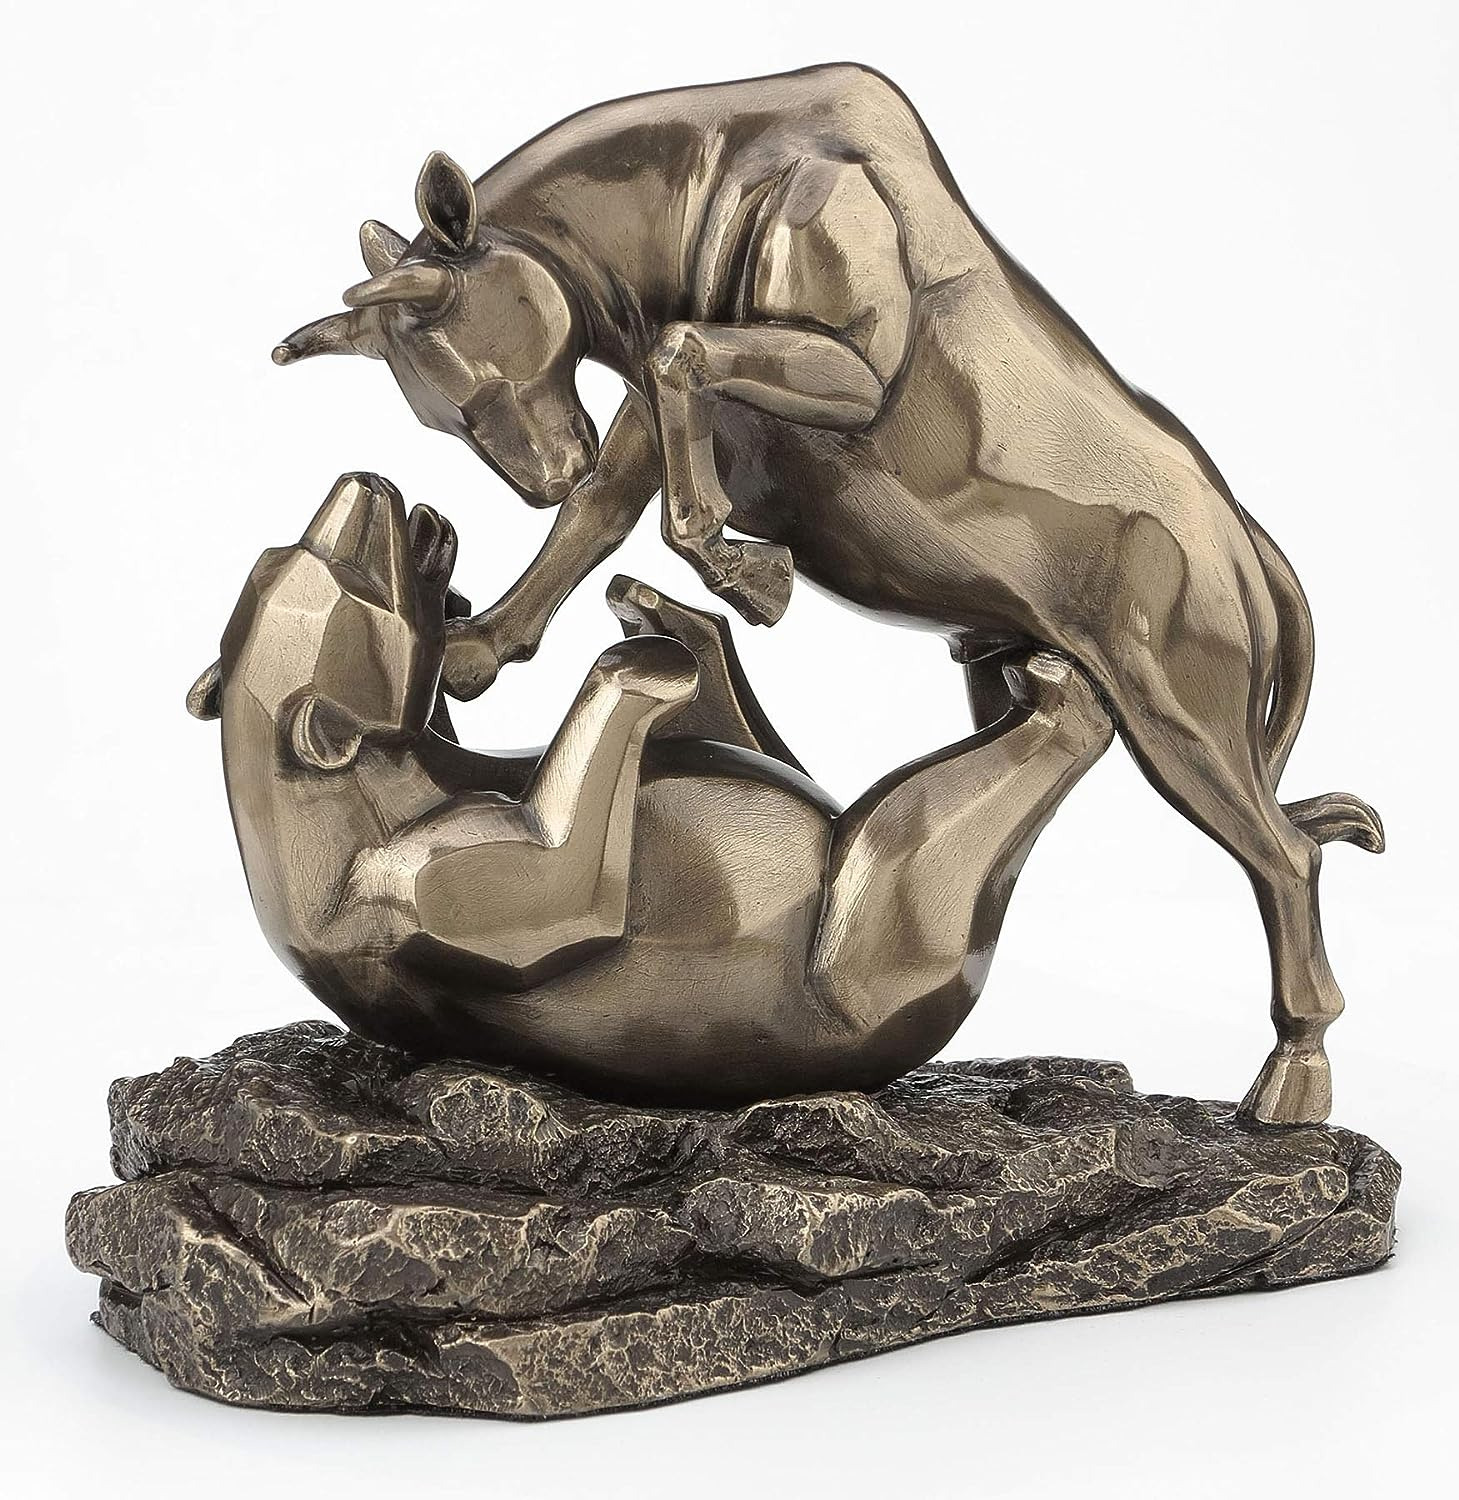 Bull and Bear Statue, Wall Street Bull Statue, Stock Market Gifts for Men, Gifts